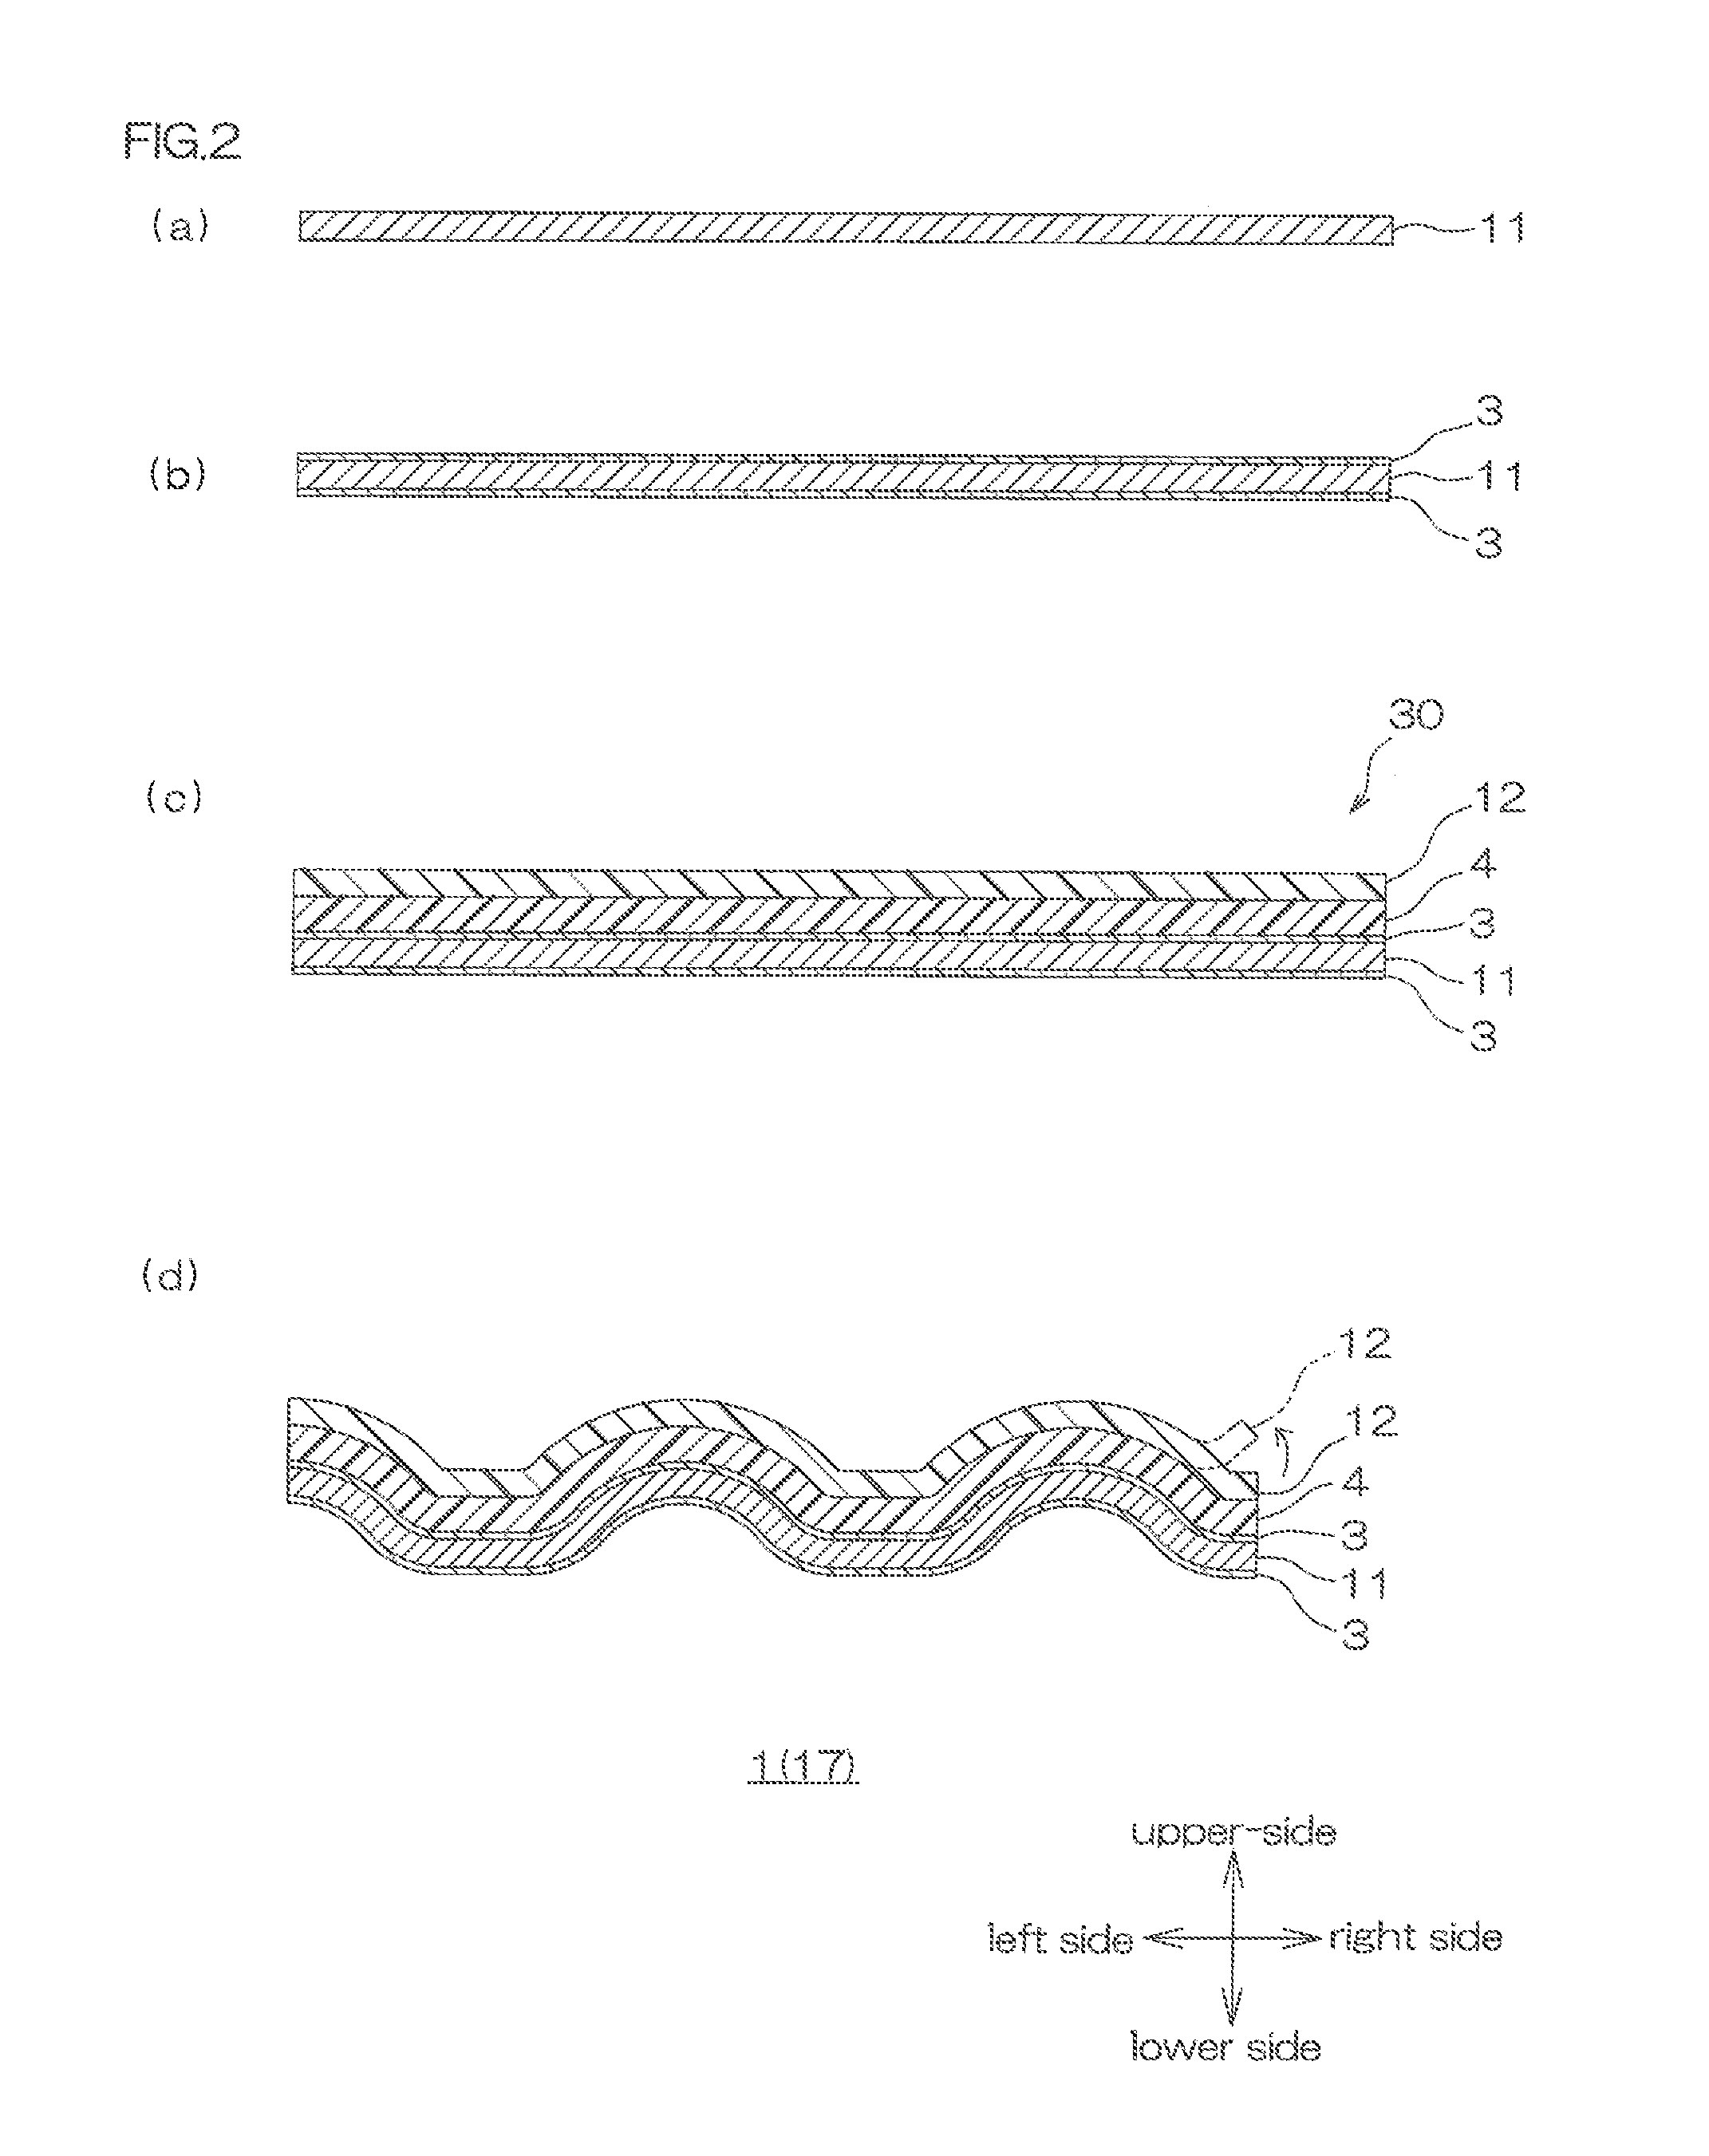 Conductive adhesive sheet, method for producing the same, collector electrode, and solar cell module